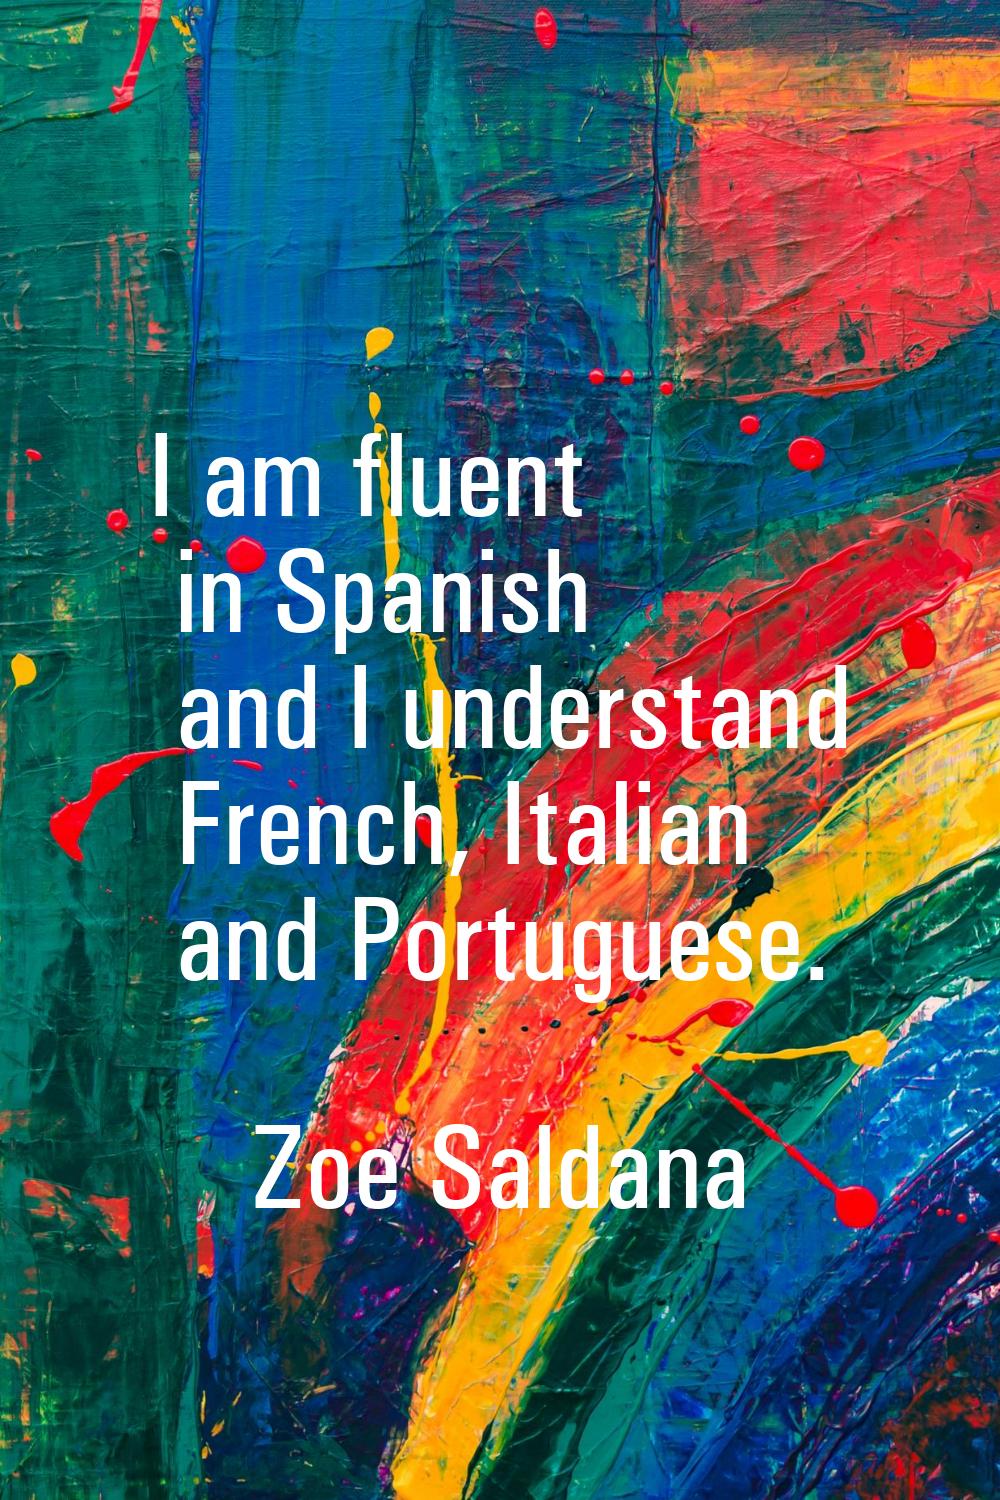 I am fluent in Spanish and I understand French, Italian and Portuguese.